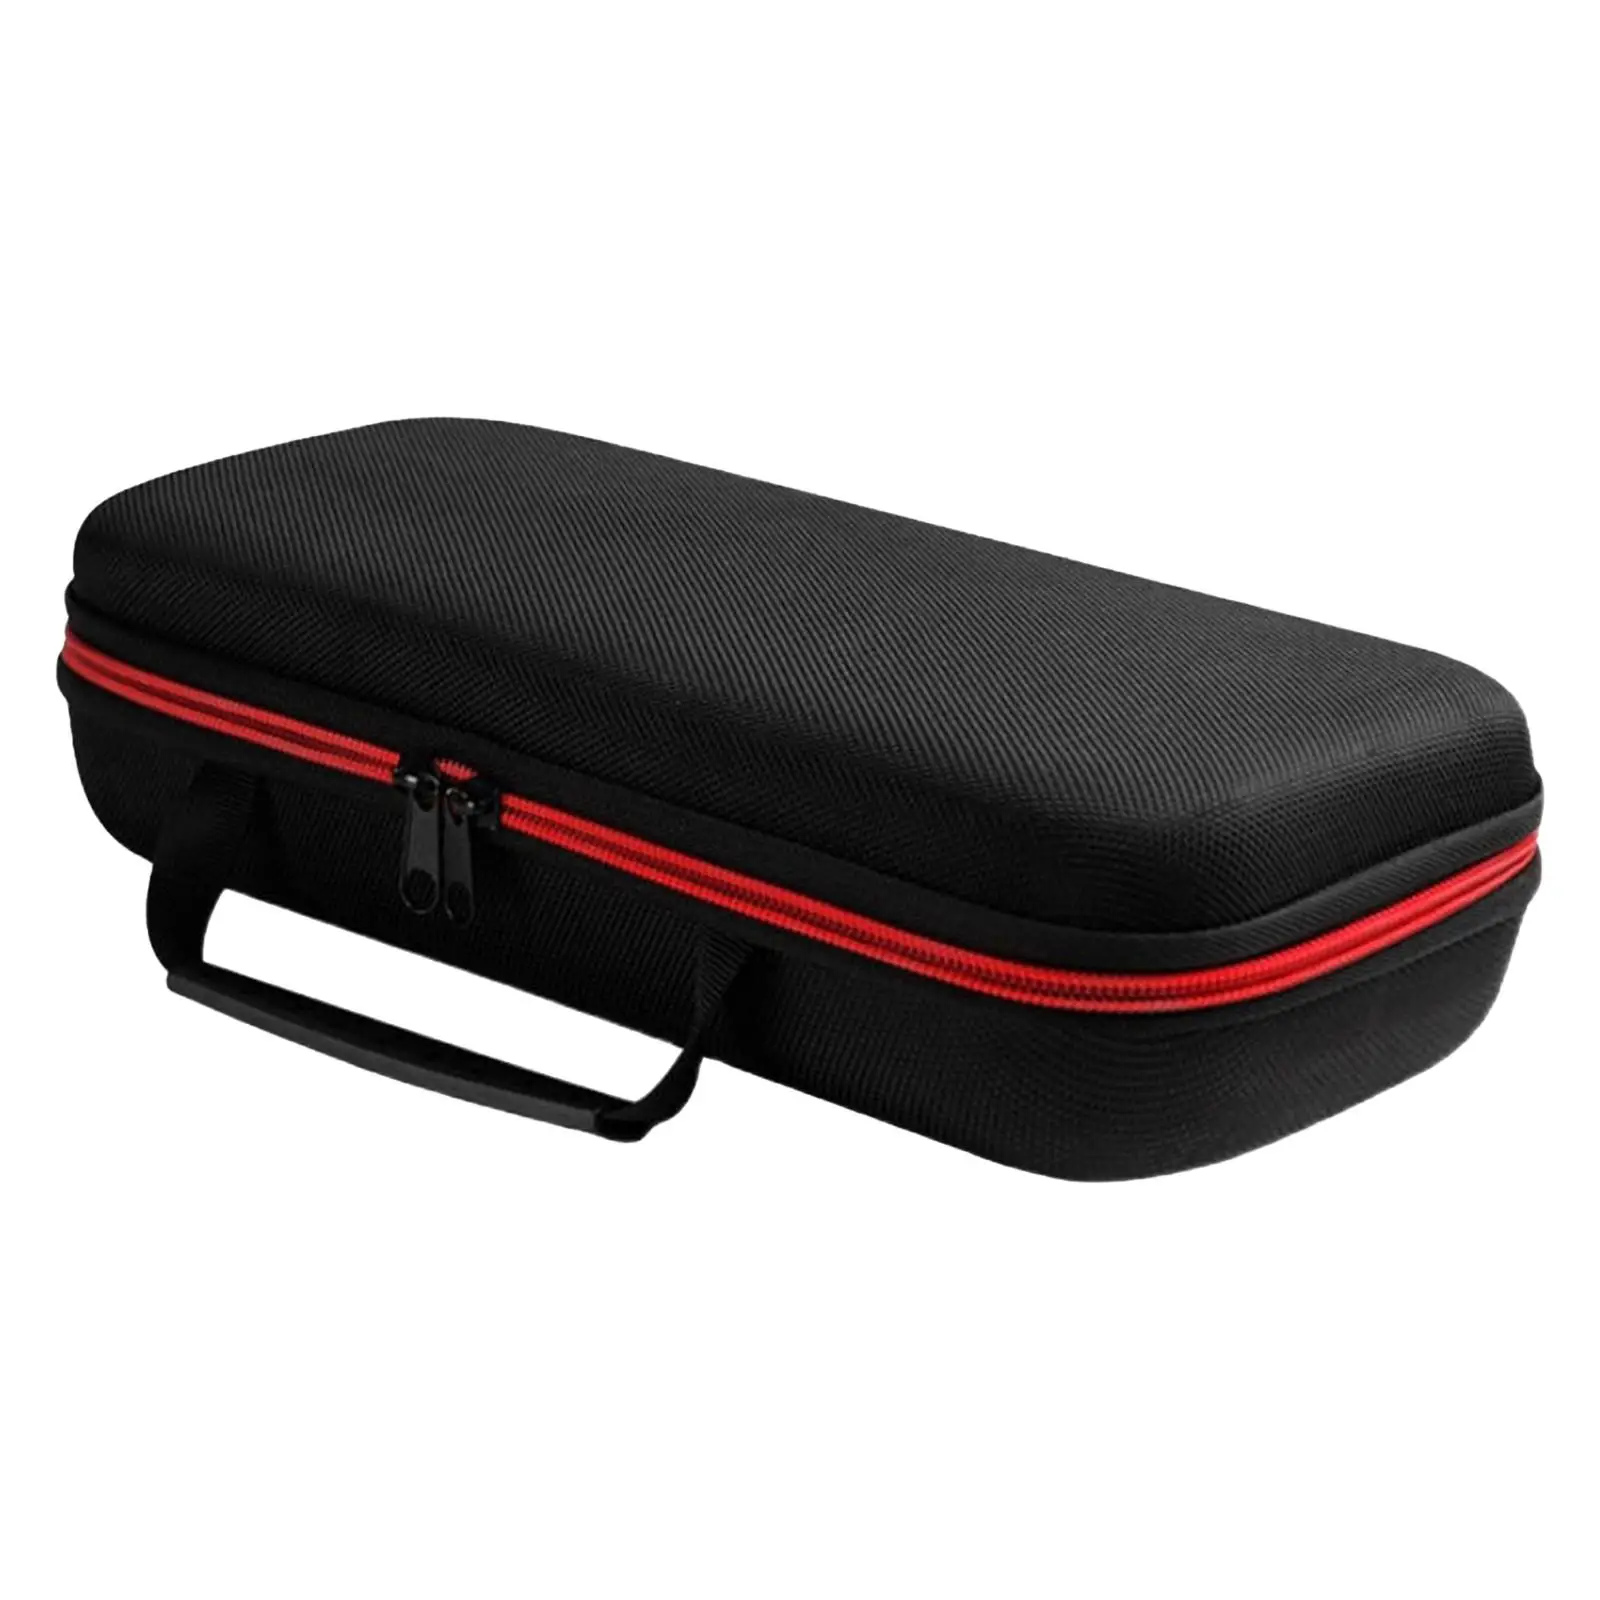 Microphone Storage Case Hard EVA Case Waterproof Water Resistant Organizer Portable Case for Business Outing Travel Trip